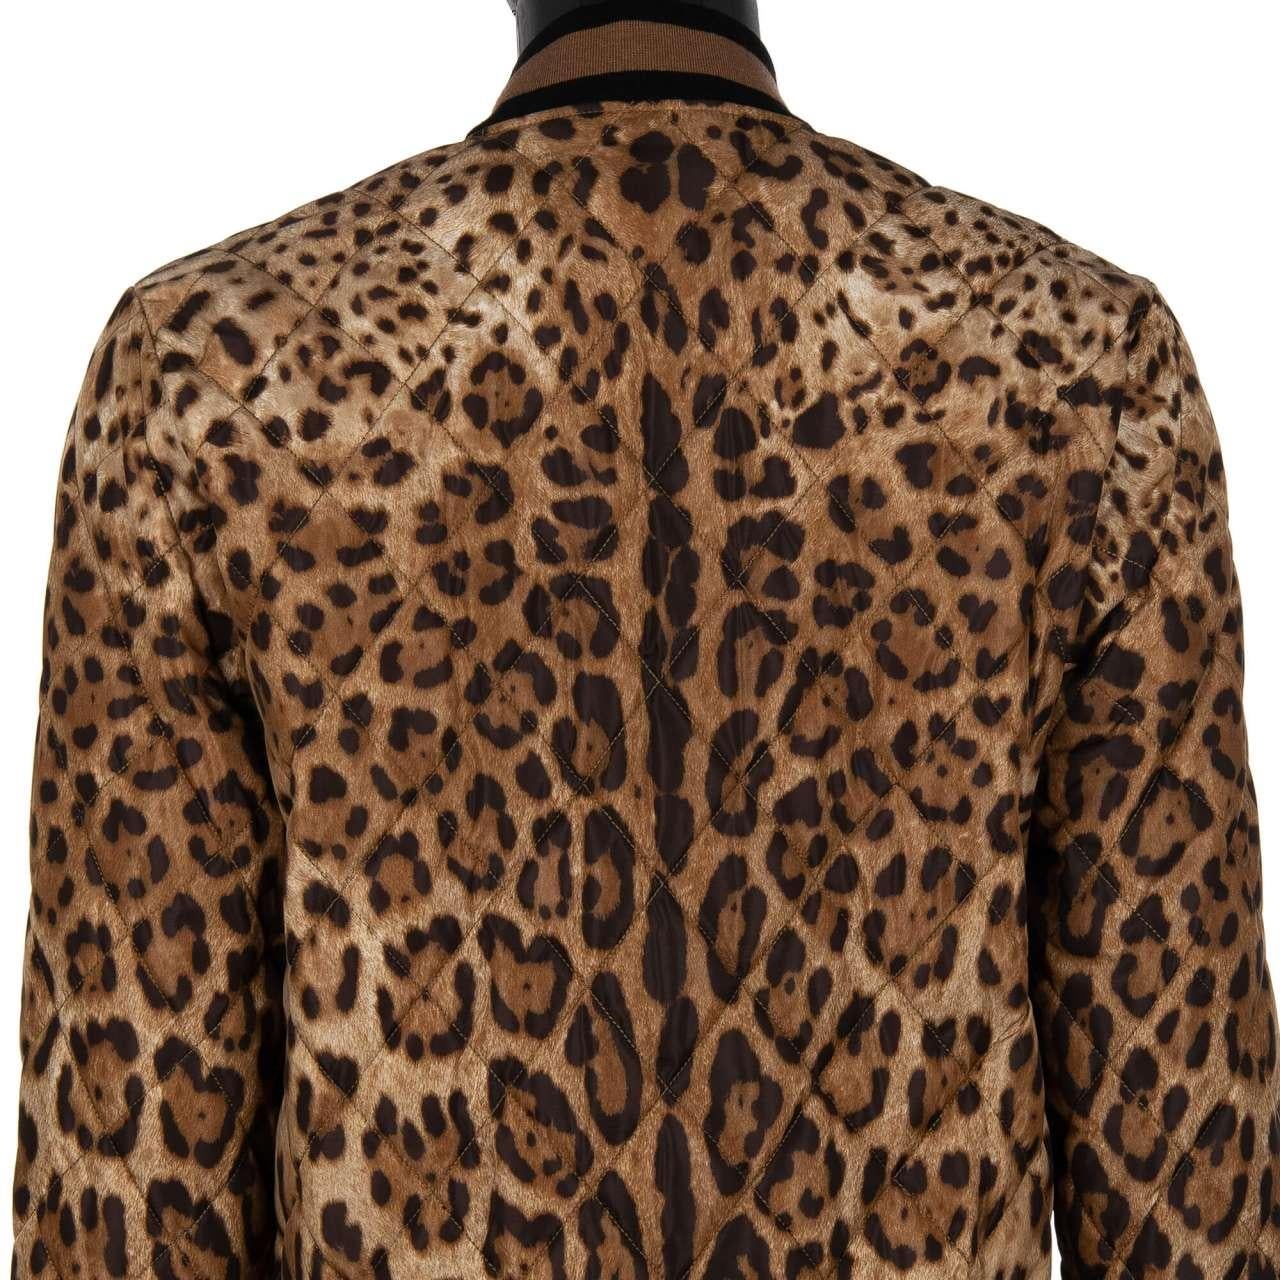 D&G Quilted Leopard Printed Nylon Bomber Jacket with DG Logo Brown Black 52 For Sale 2